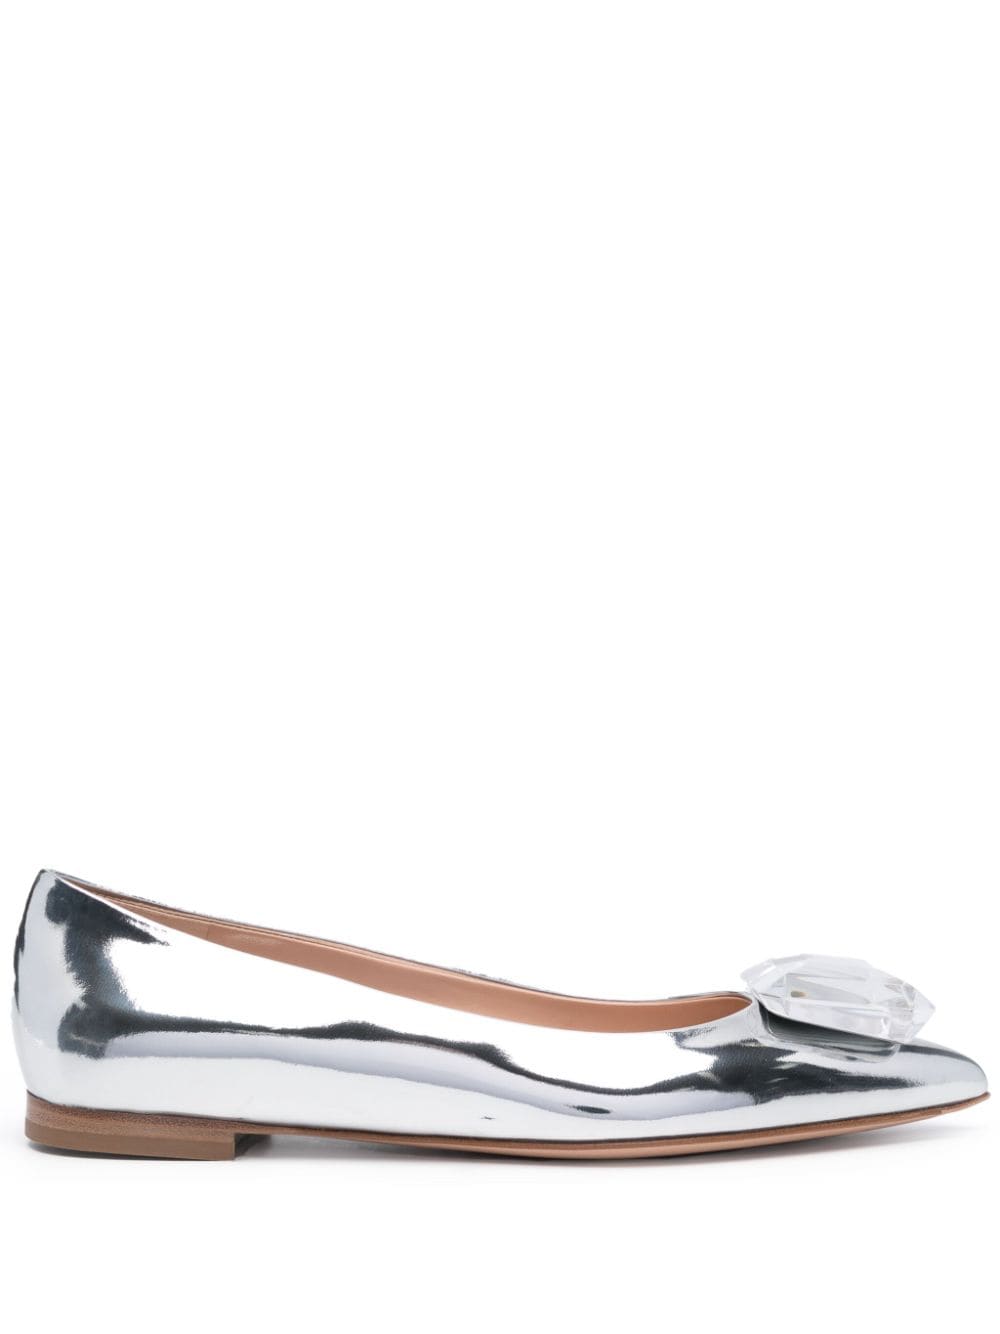 Gianvito Rossi Jaipur Patent-finish Leather Ballerina Shoes In Silber